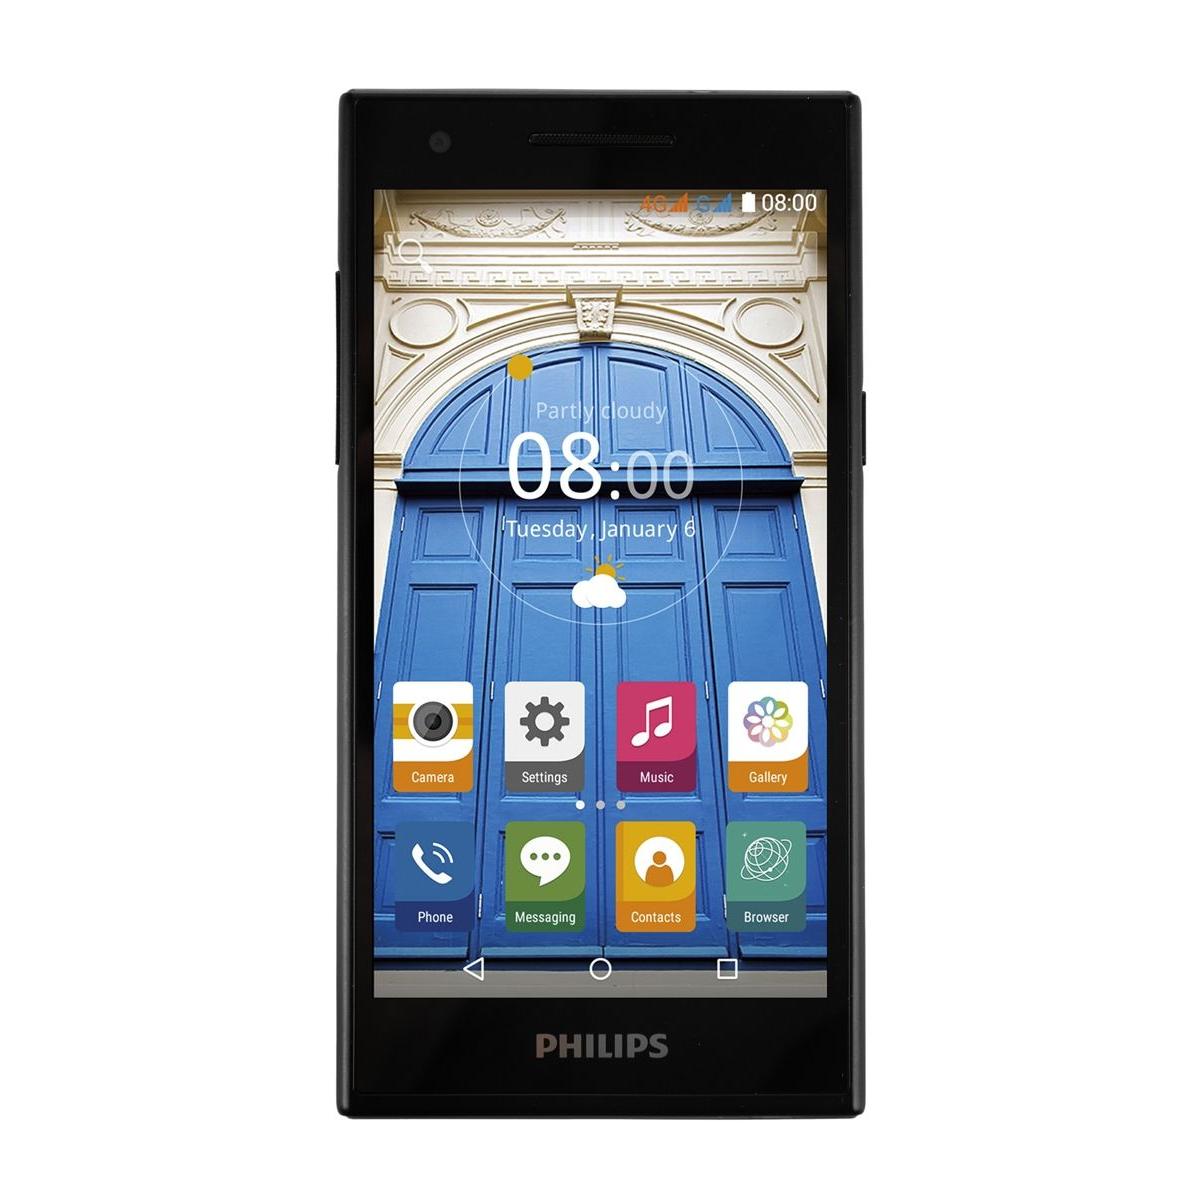 Браузер на филипс. Смартфон Philips s396. Смартфон Philips s396 LTE. Смартфон Philips s396, черный. Philips s396 Powered by Android.